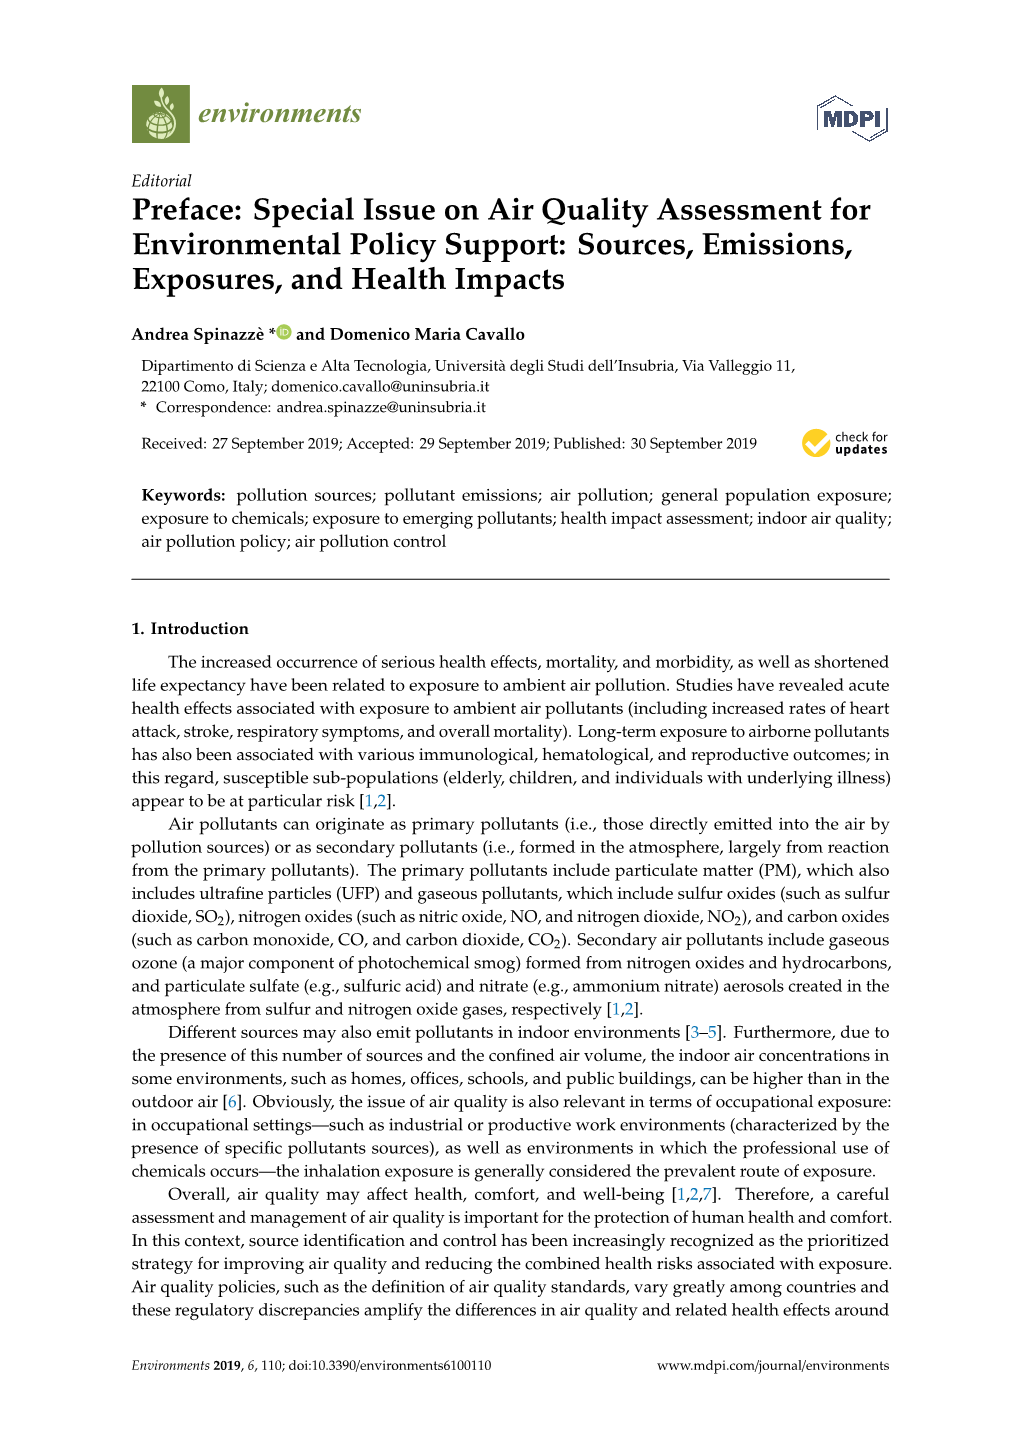 Preface: Special Issue on Air Quality Assessment for Environmental Policy Support: Sources, Emissions, Exposures, and Health Impacts